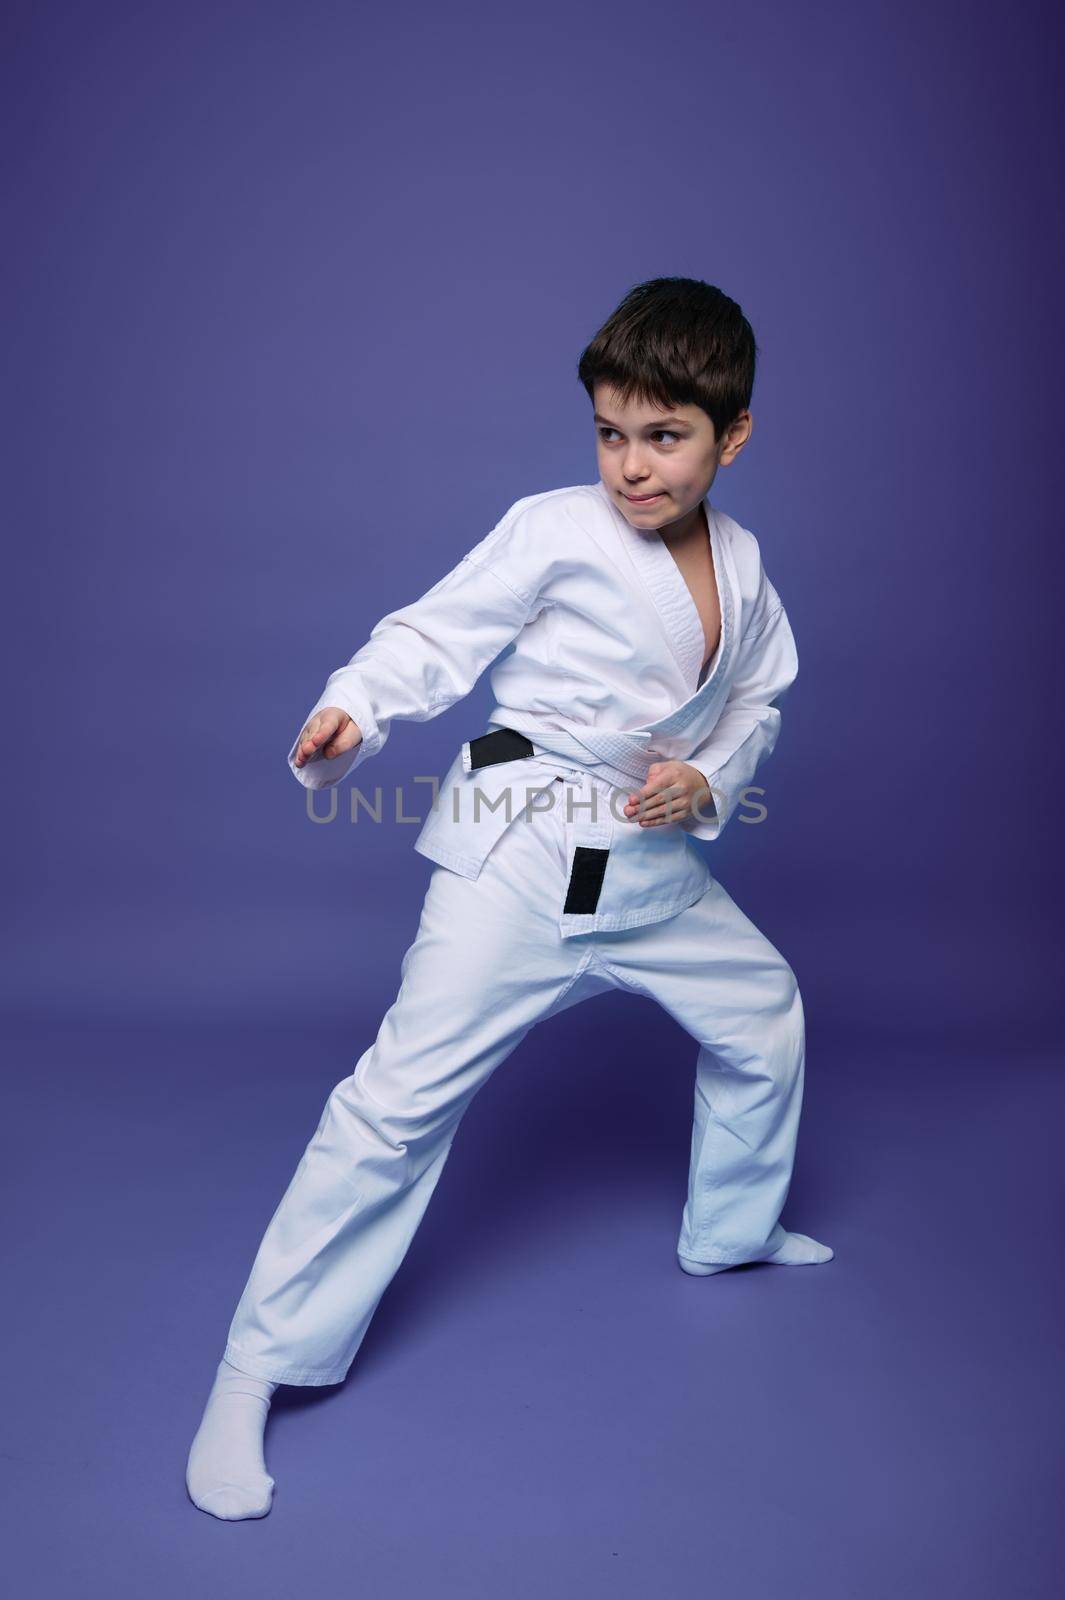 Oriental martial arts. Full length portrait of an aikido fighter, Caucasian 10 years old boy in kimono improves his fighting skills, isolated on violet background with copy space